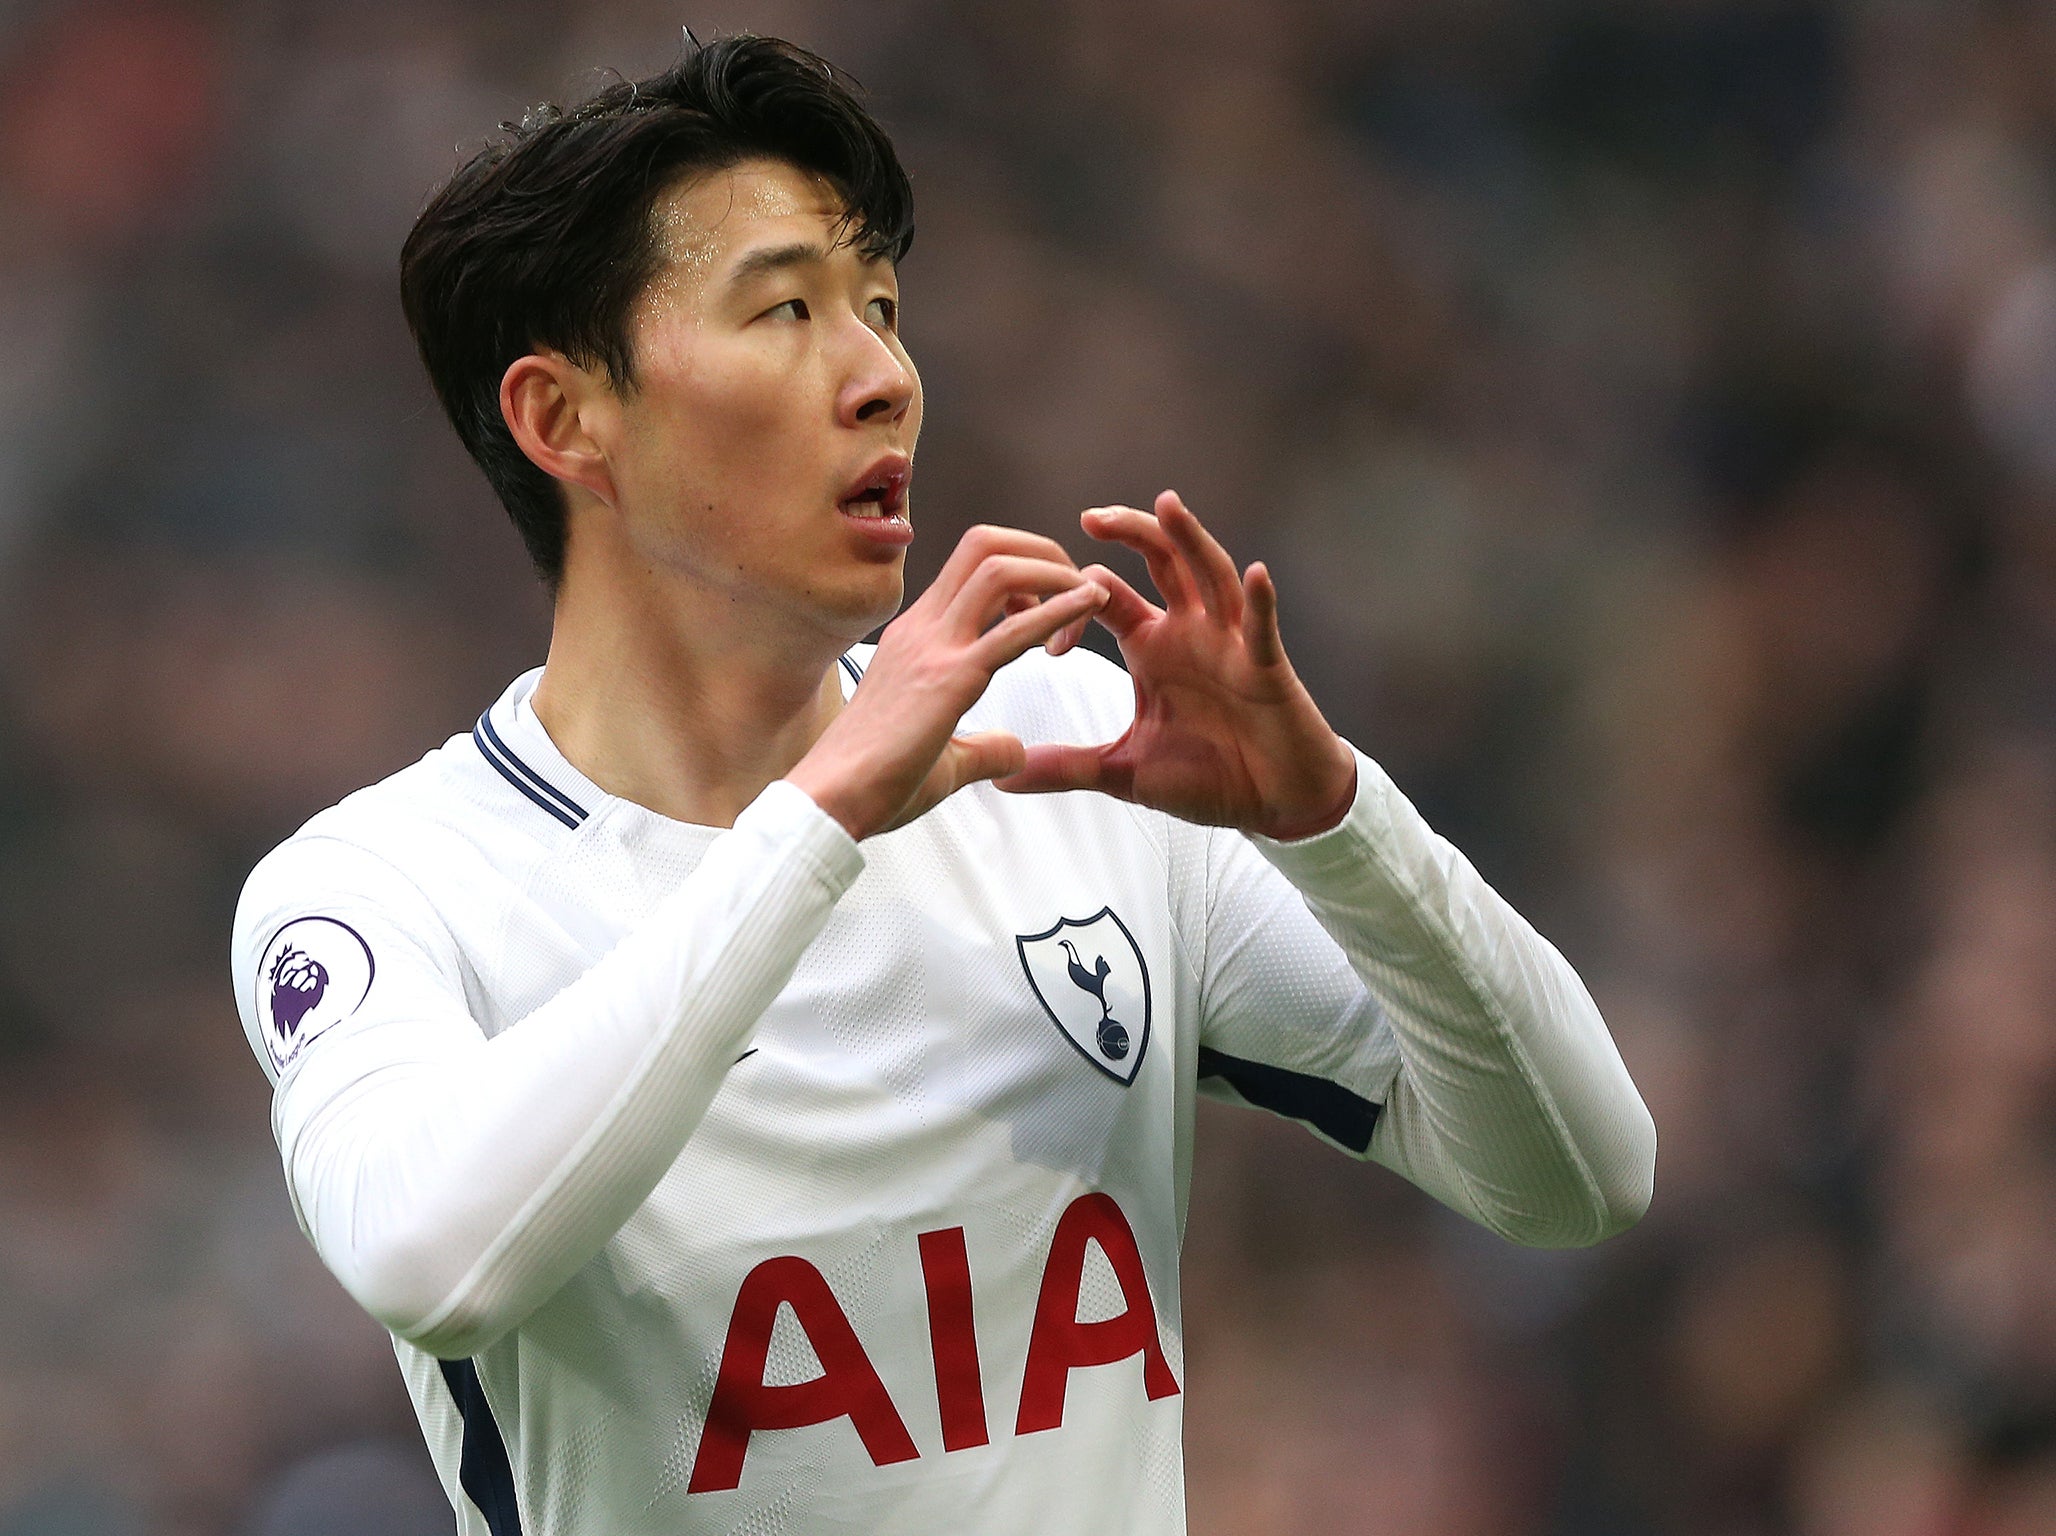 Son Heung-min was the star of the show at Wembley